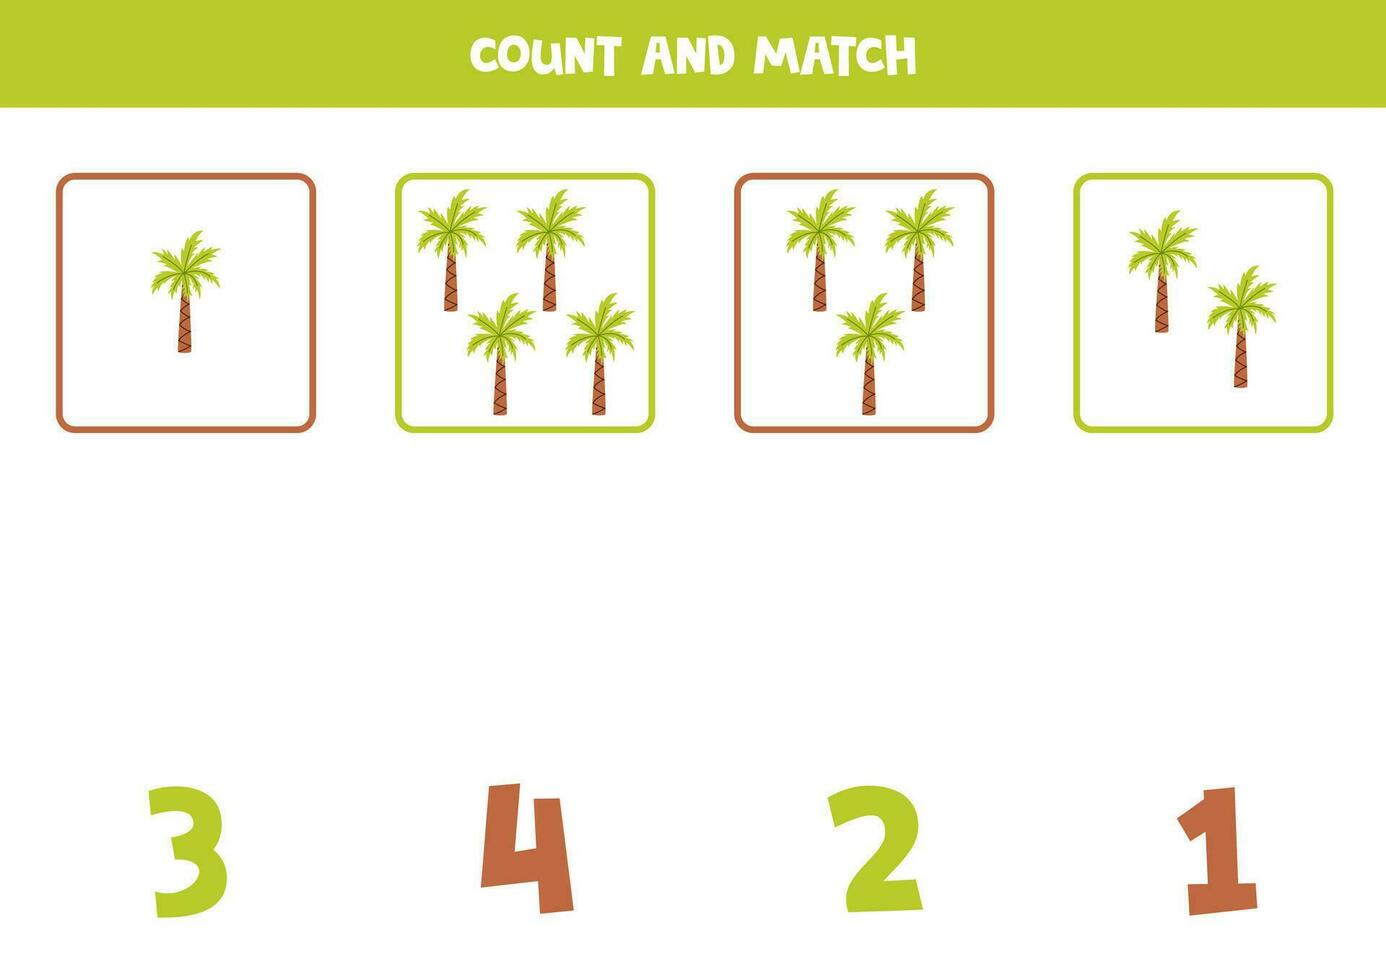 Counting game for kids. Count all palms and match with numbers. Worksheet for children. vector